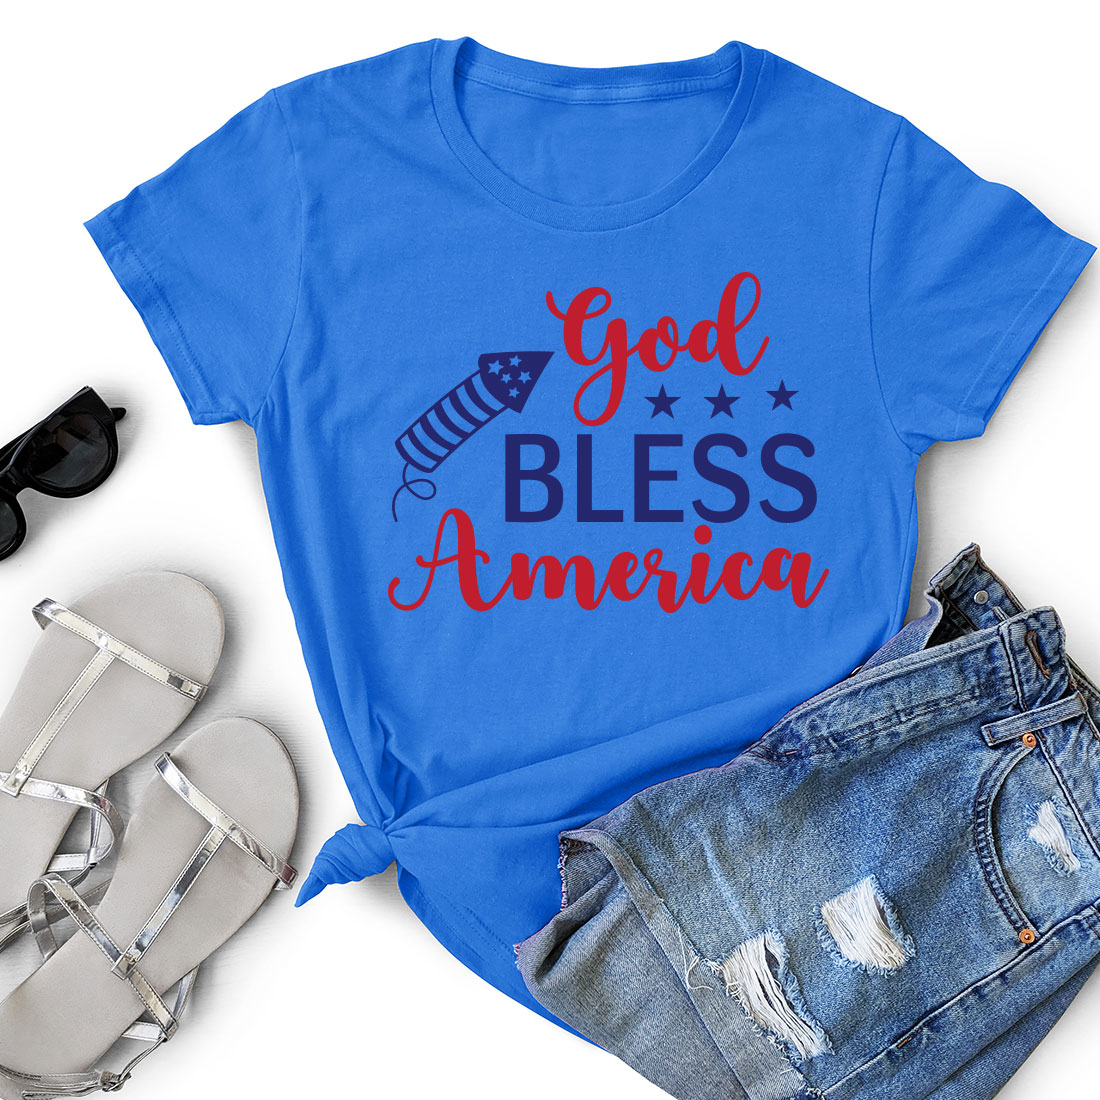 T - shirt that says god bless america next to a pair of shorts.